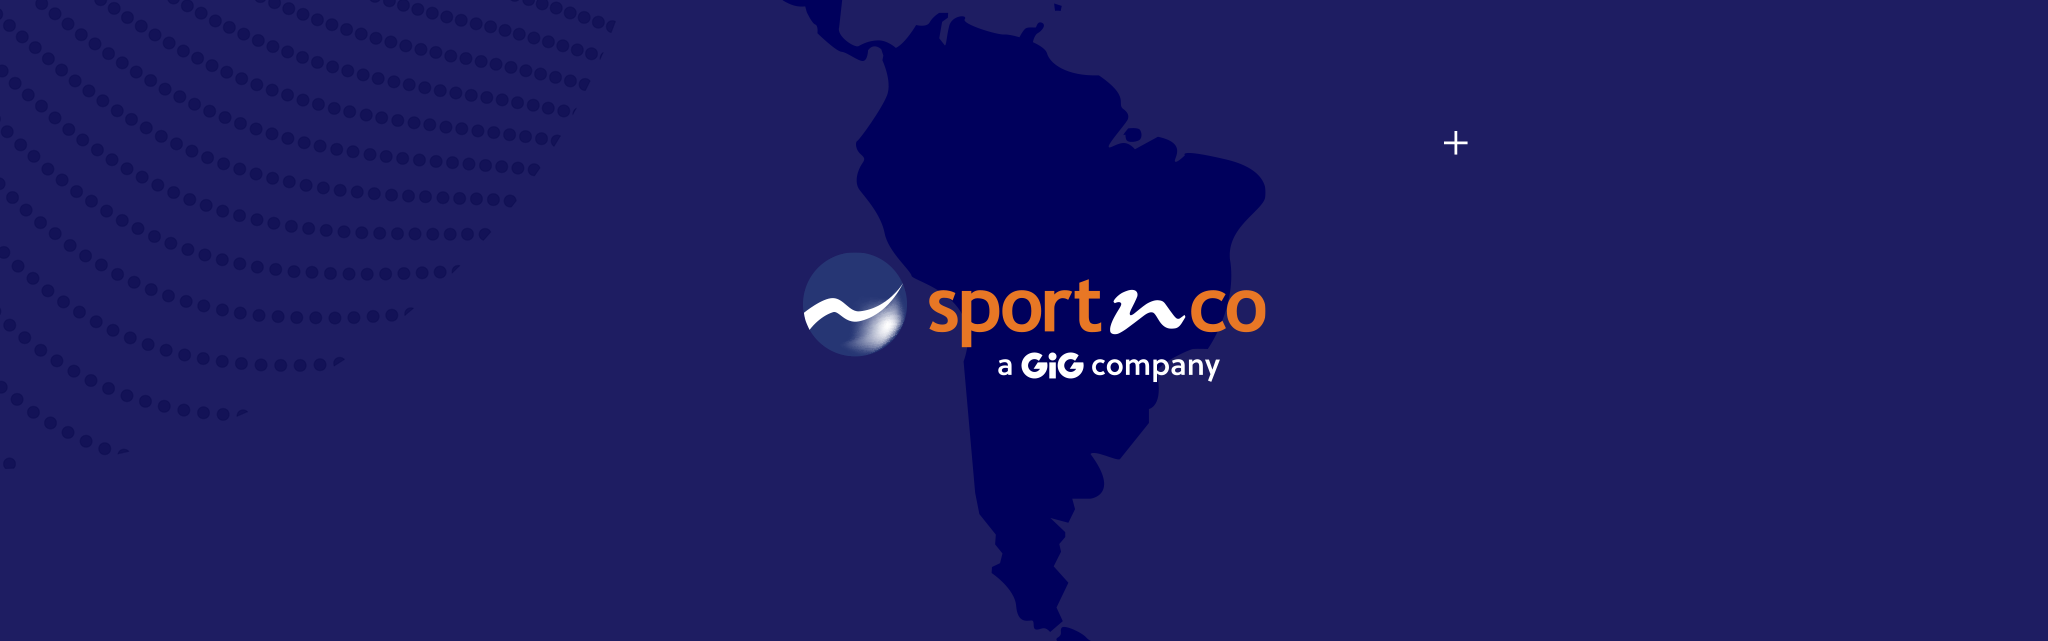 GiG_PR_colombia_sports